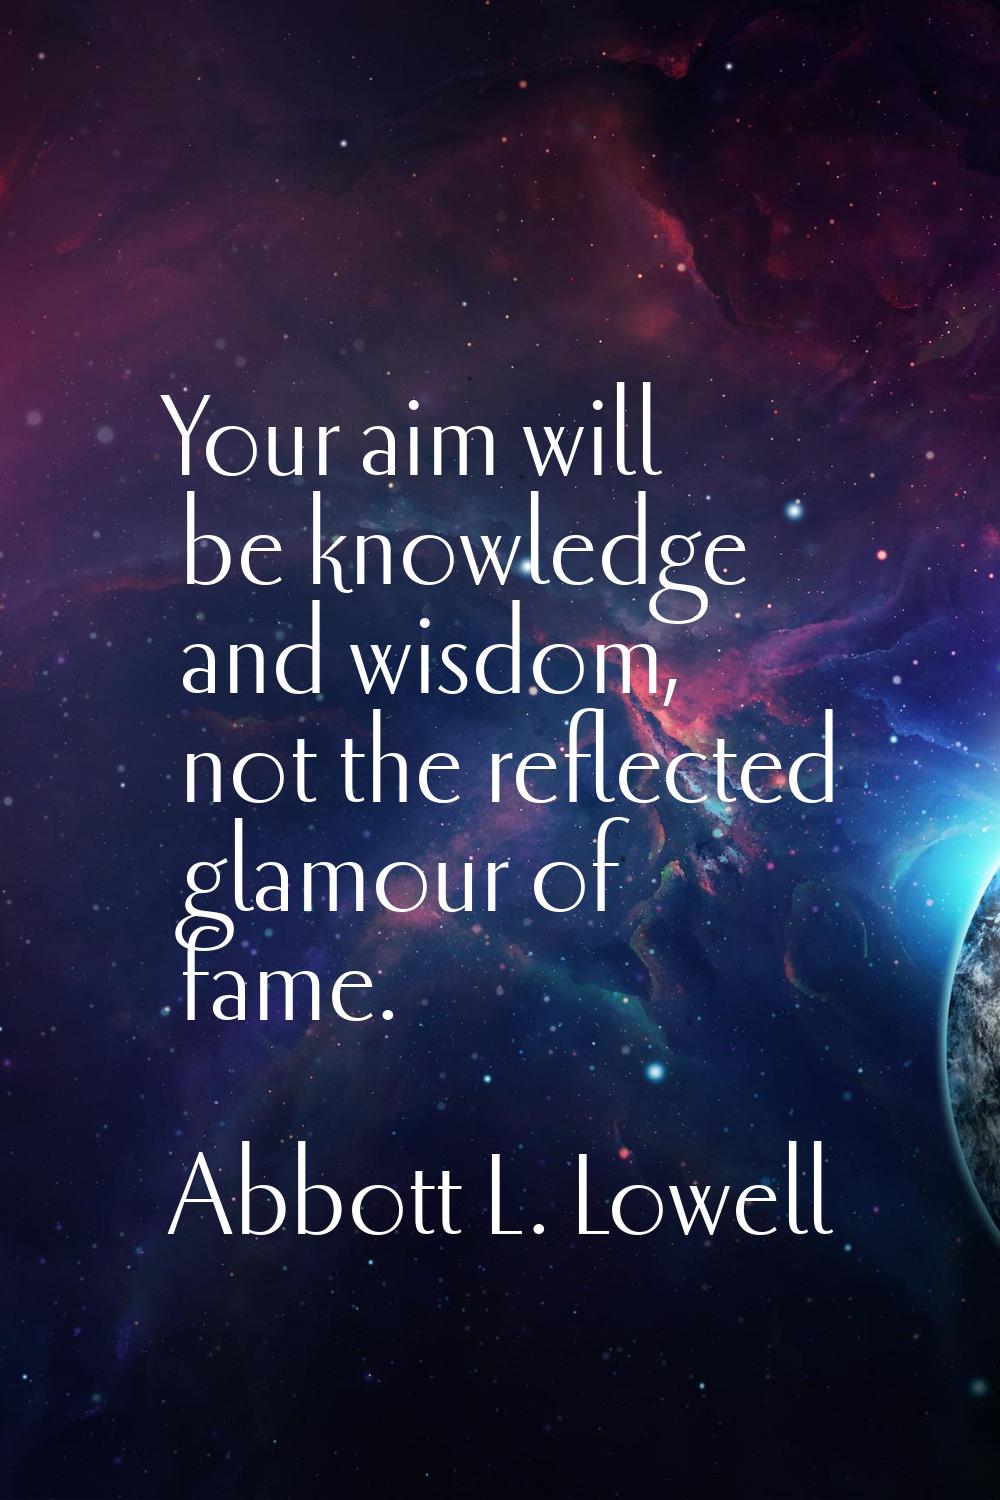 Your aim will be knowledge and wisdom, not the reflected glamour of fame.